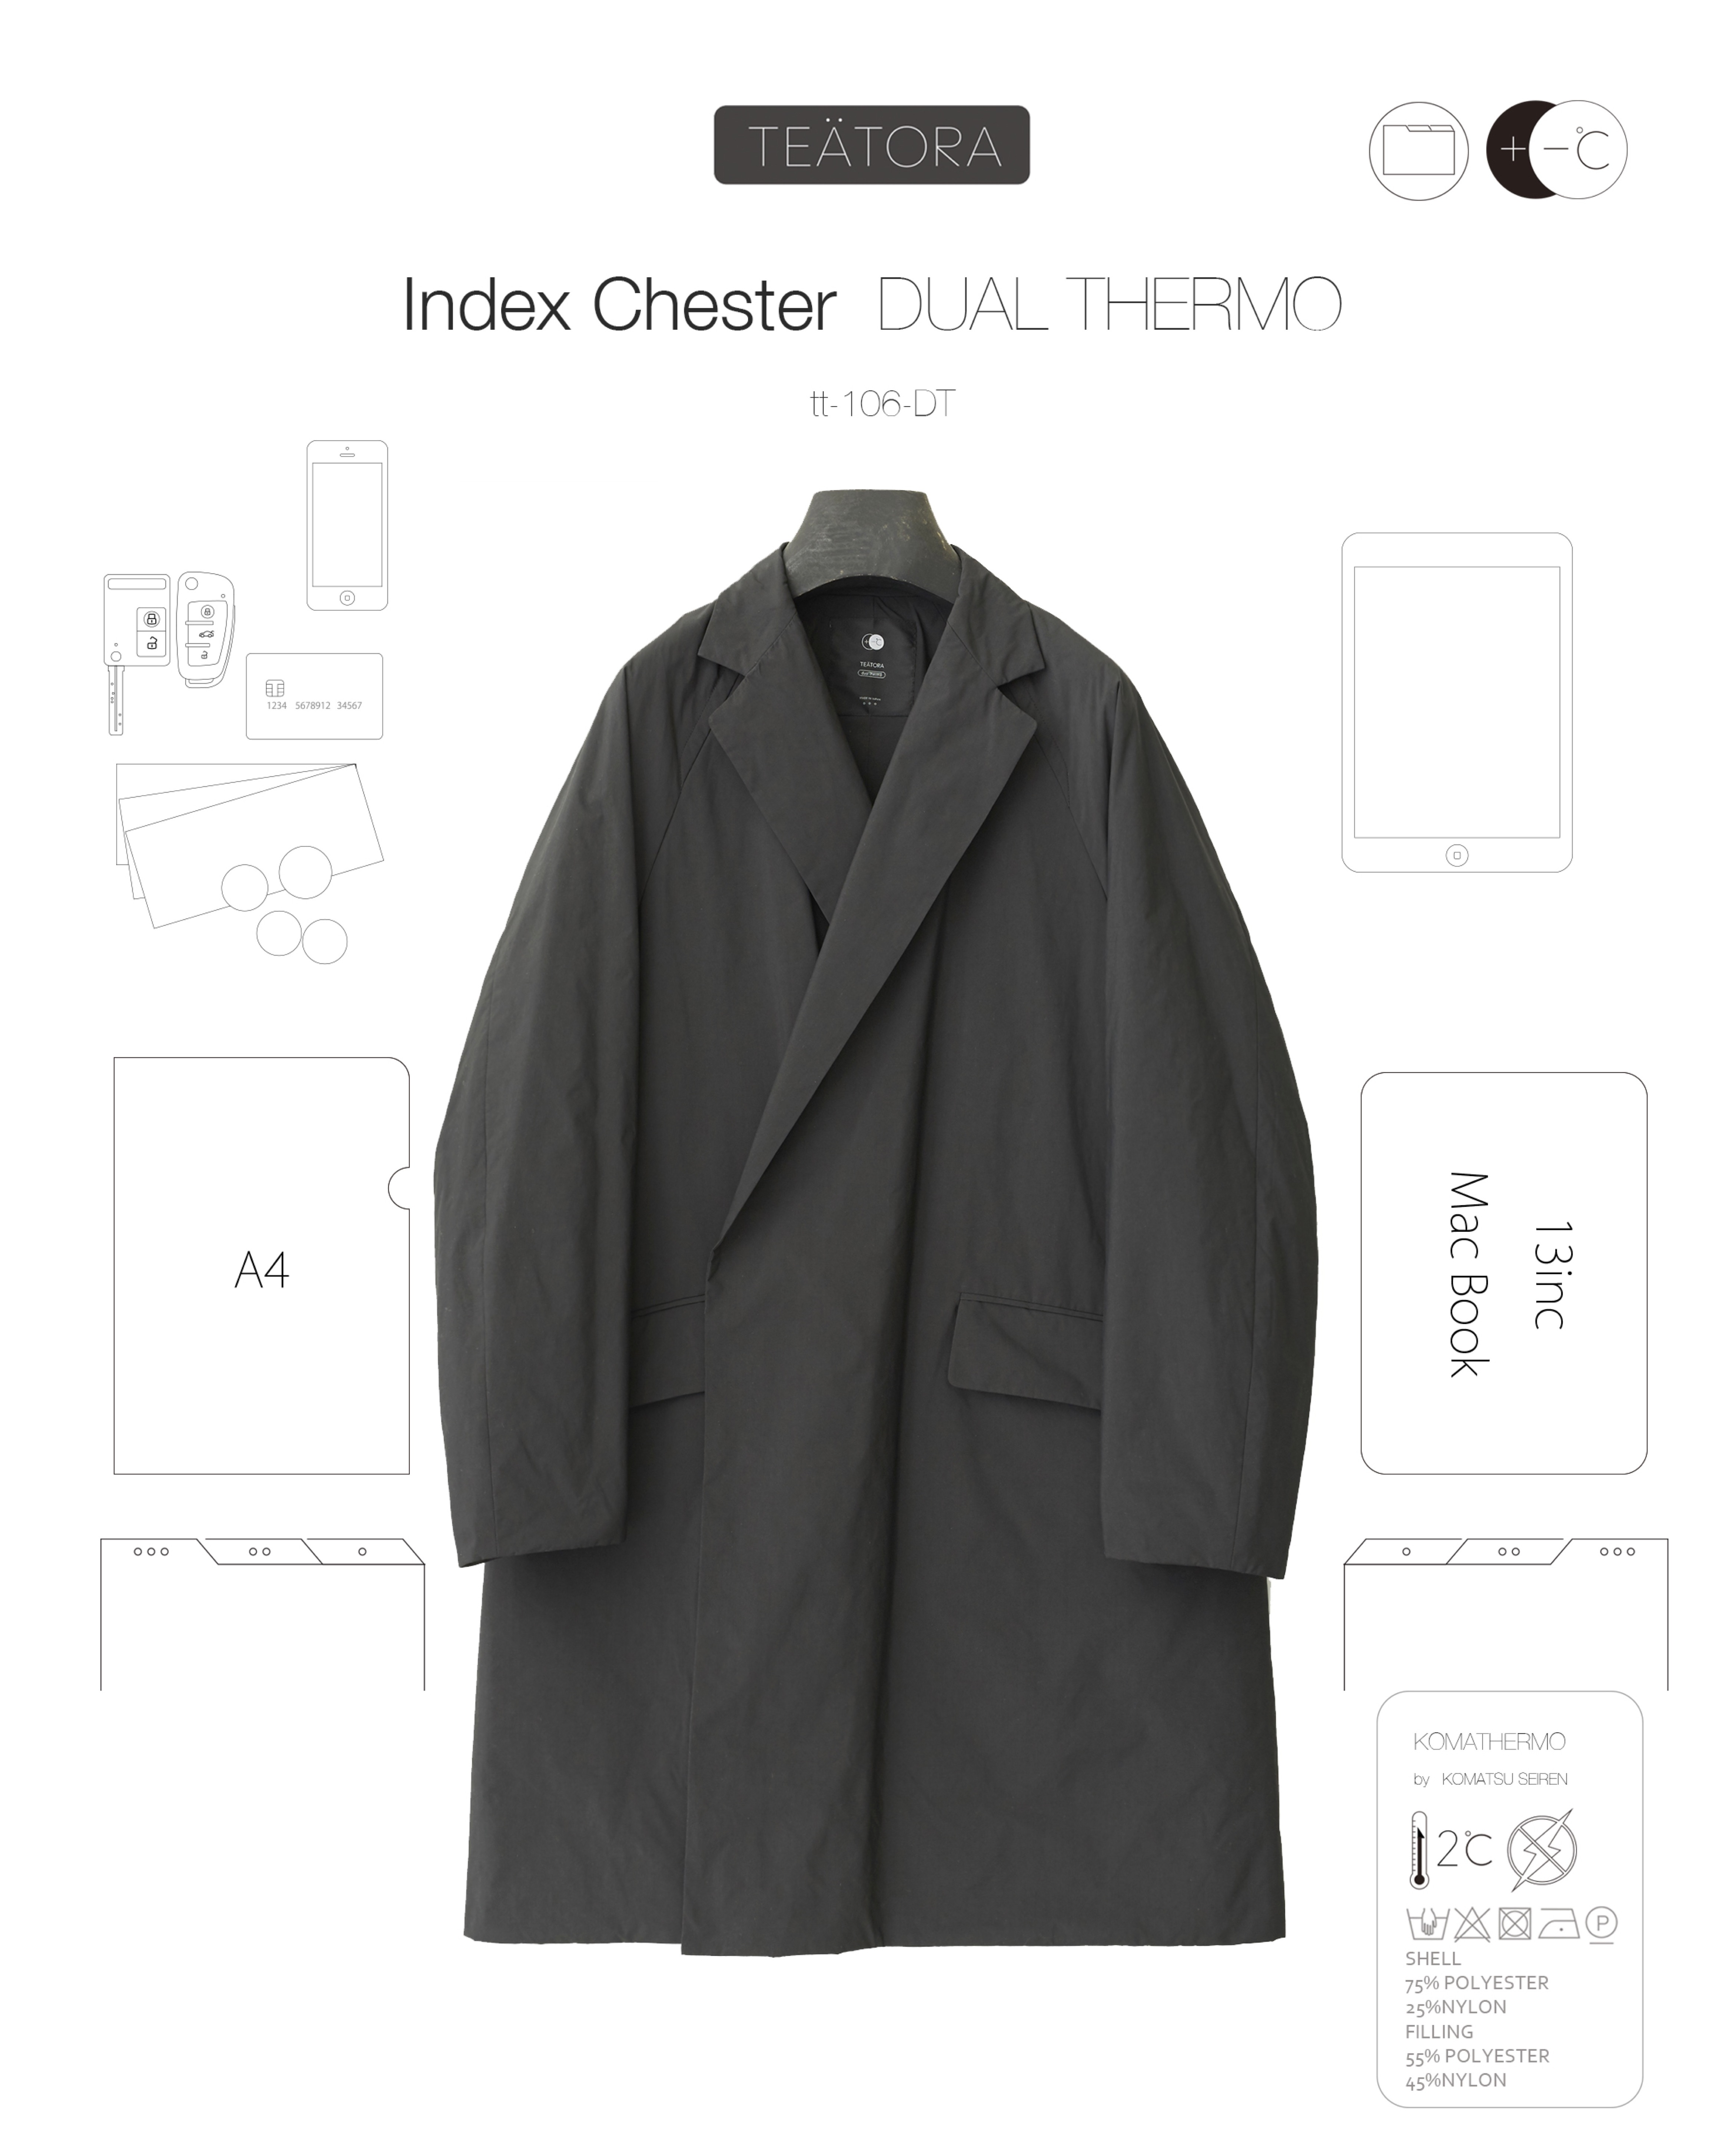 TEATORA Index Chester DUAL-THERMO